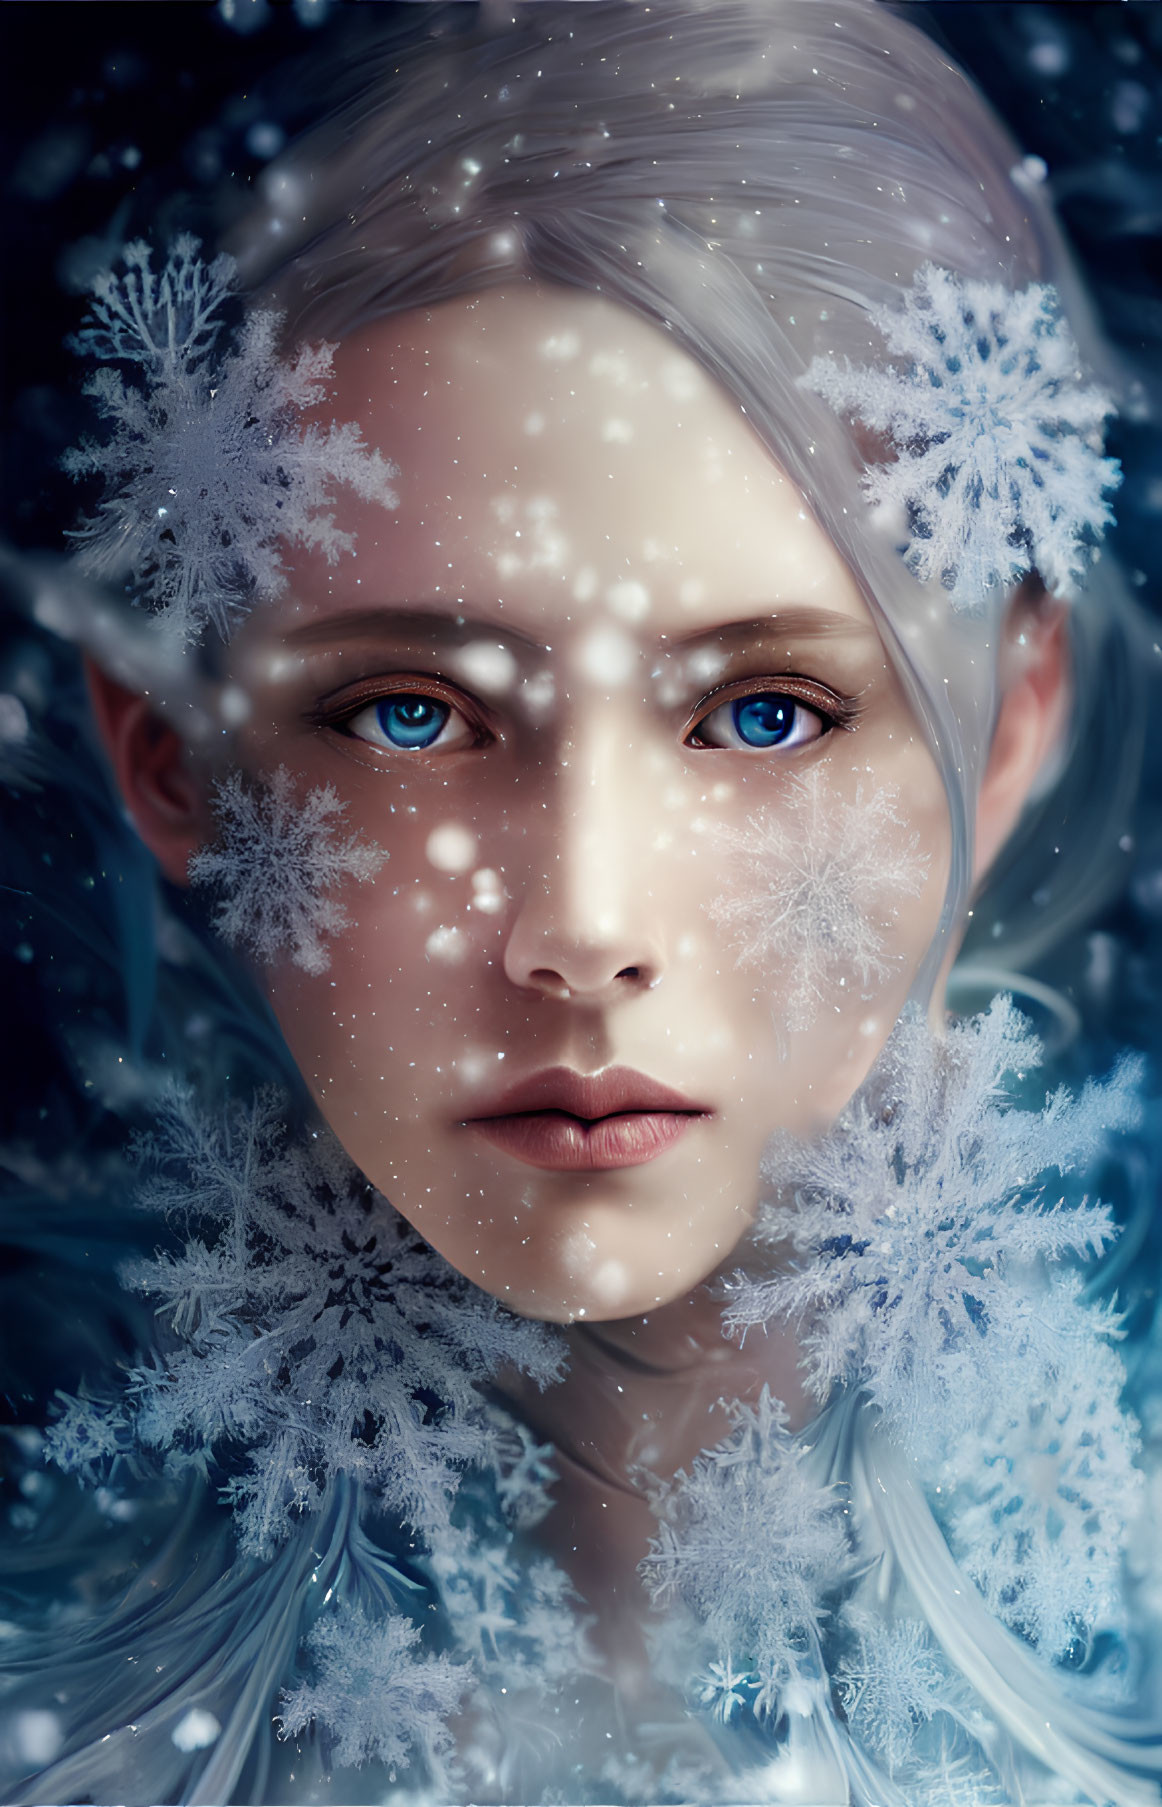 Close-up Digital Portrait of Person with Blue Eyes, Pale Skin, White Hair & Snowflake Adorn